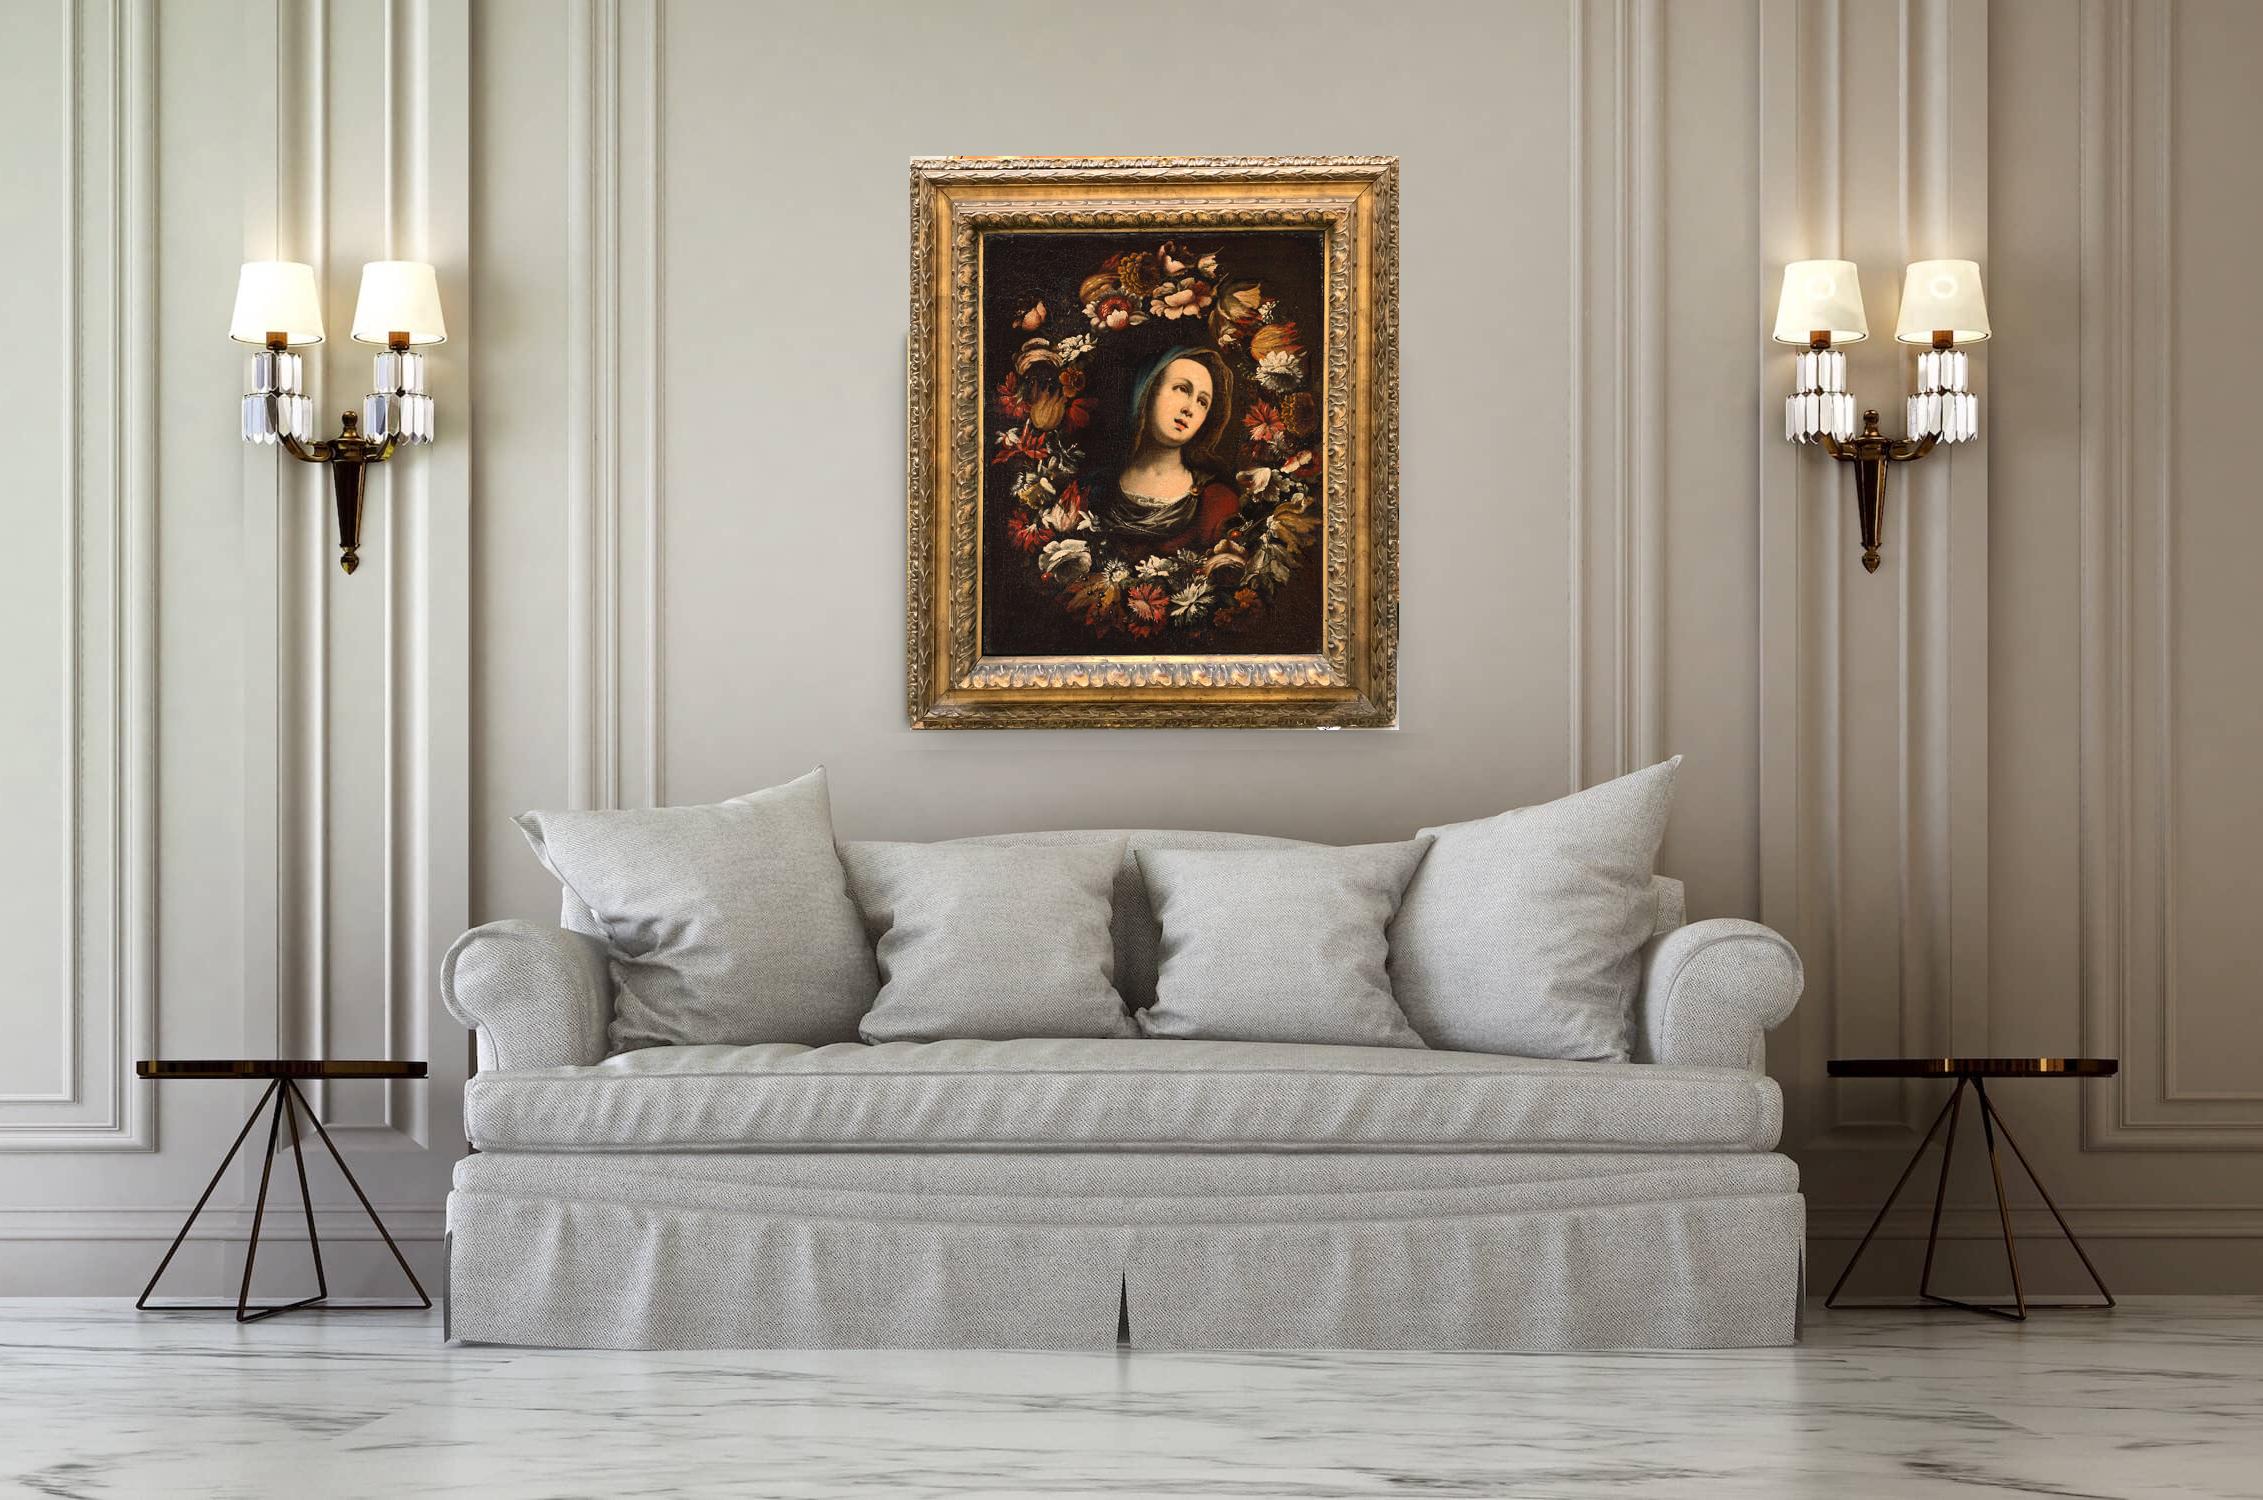 Flower Garland Virgin Paint Oil on canvas Old master 17th Century Italy For Sale 5